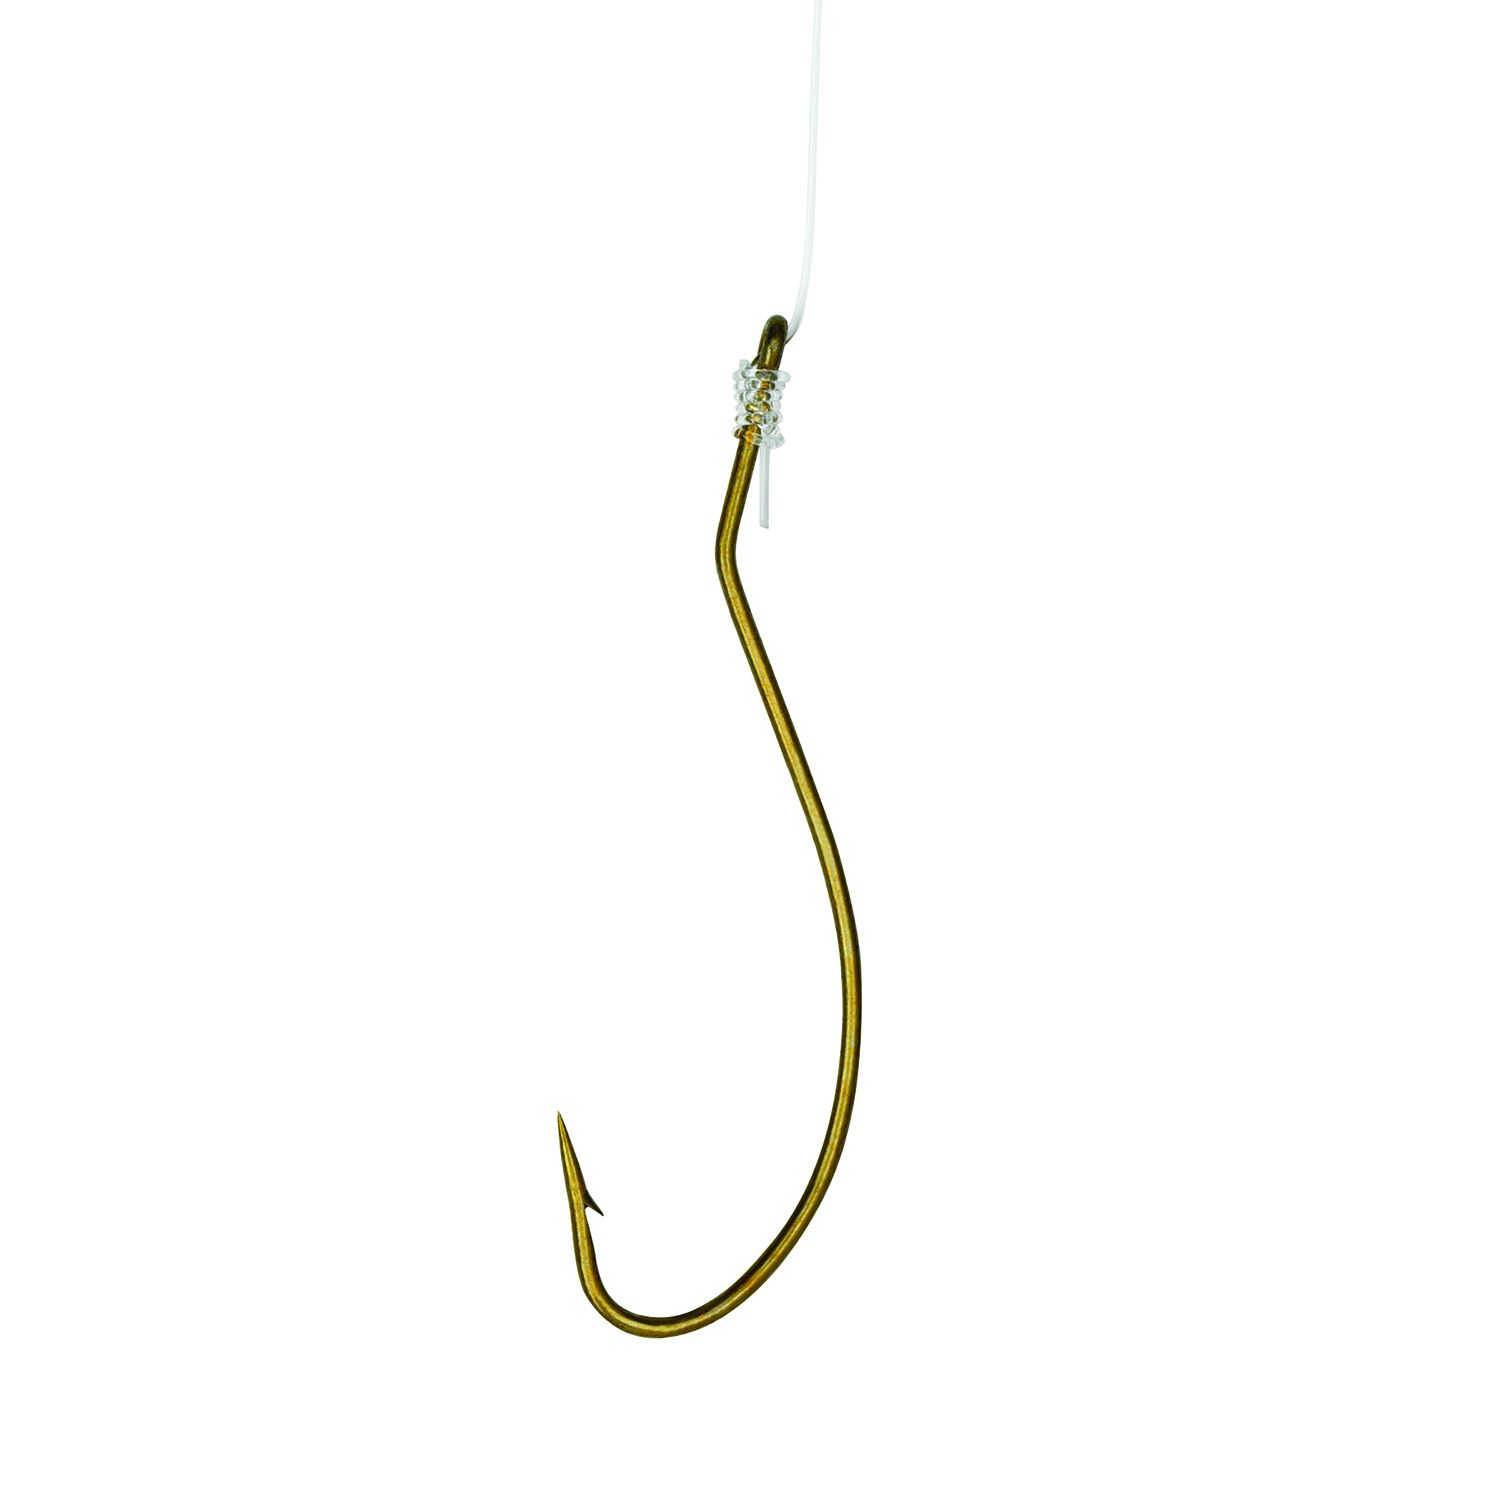 Eagle Claw 333-2 Live Minnow Fishing Hook, Bronze, One Size